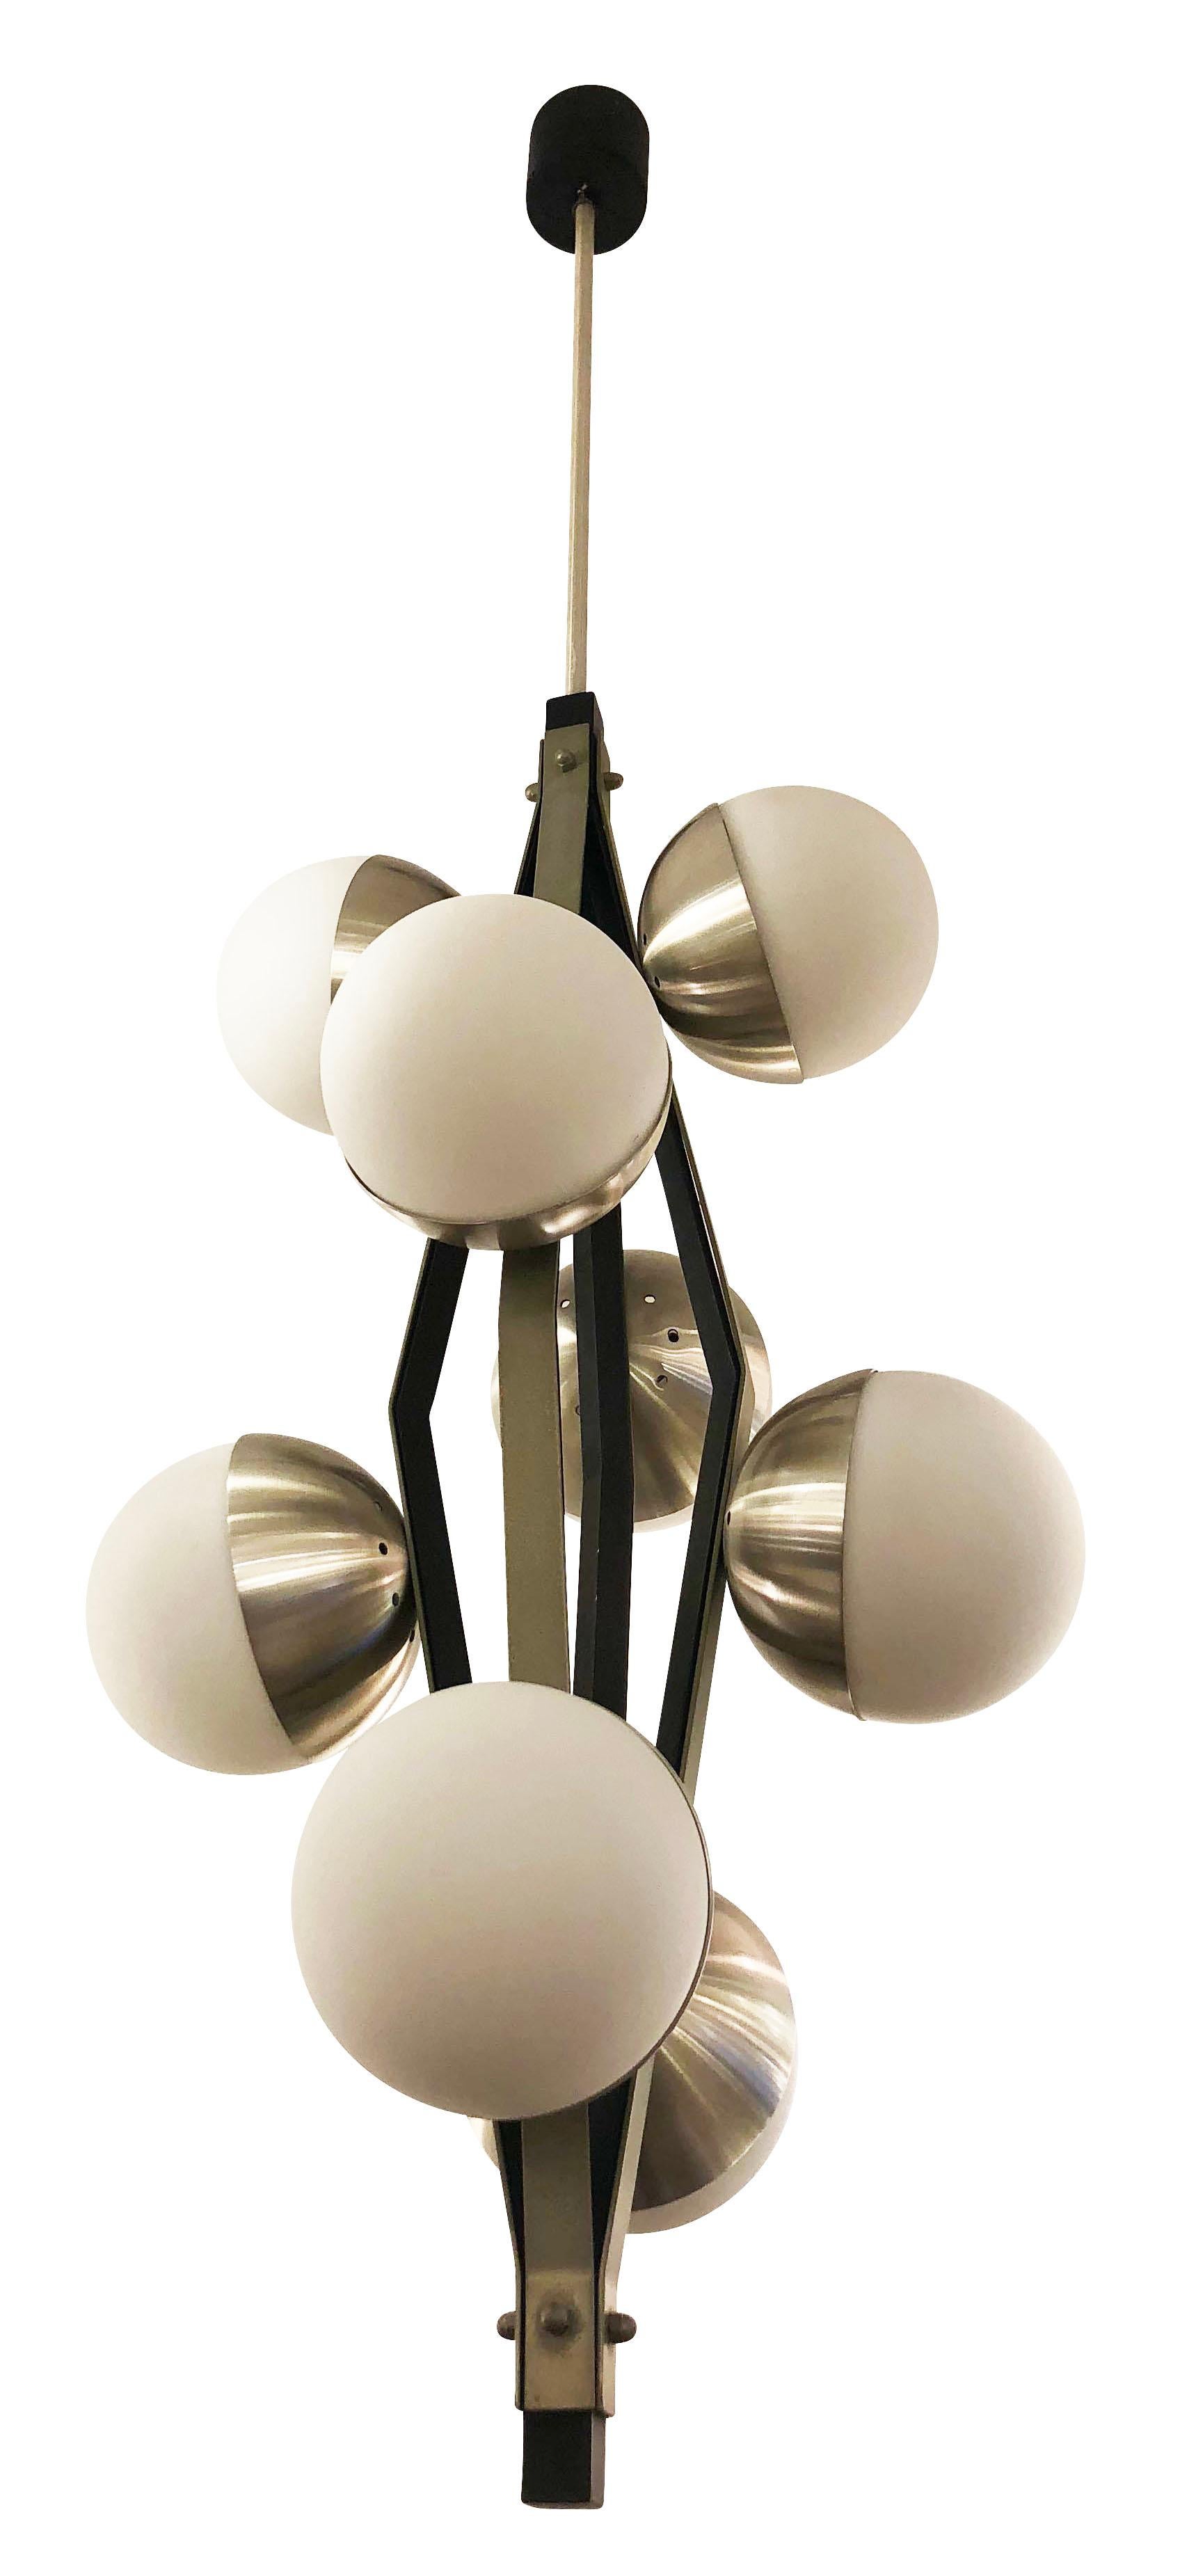 Stilnovo pendant with eight frosted glass shades on a satin nickel and black lacquered frame. Holds eight candelabra sockets. Height of stem can be adjusted as needed.

Measures: Diameter 15”

Height 44”.

   